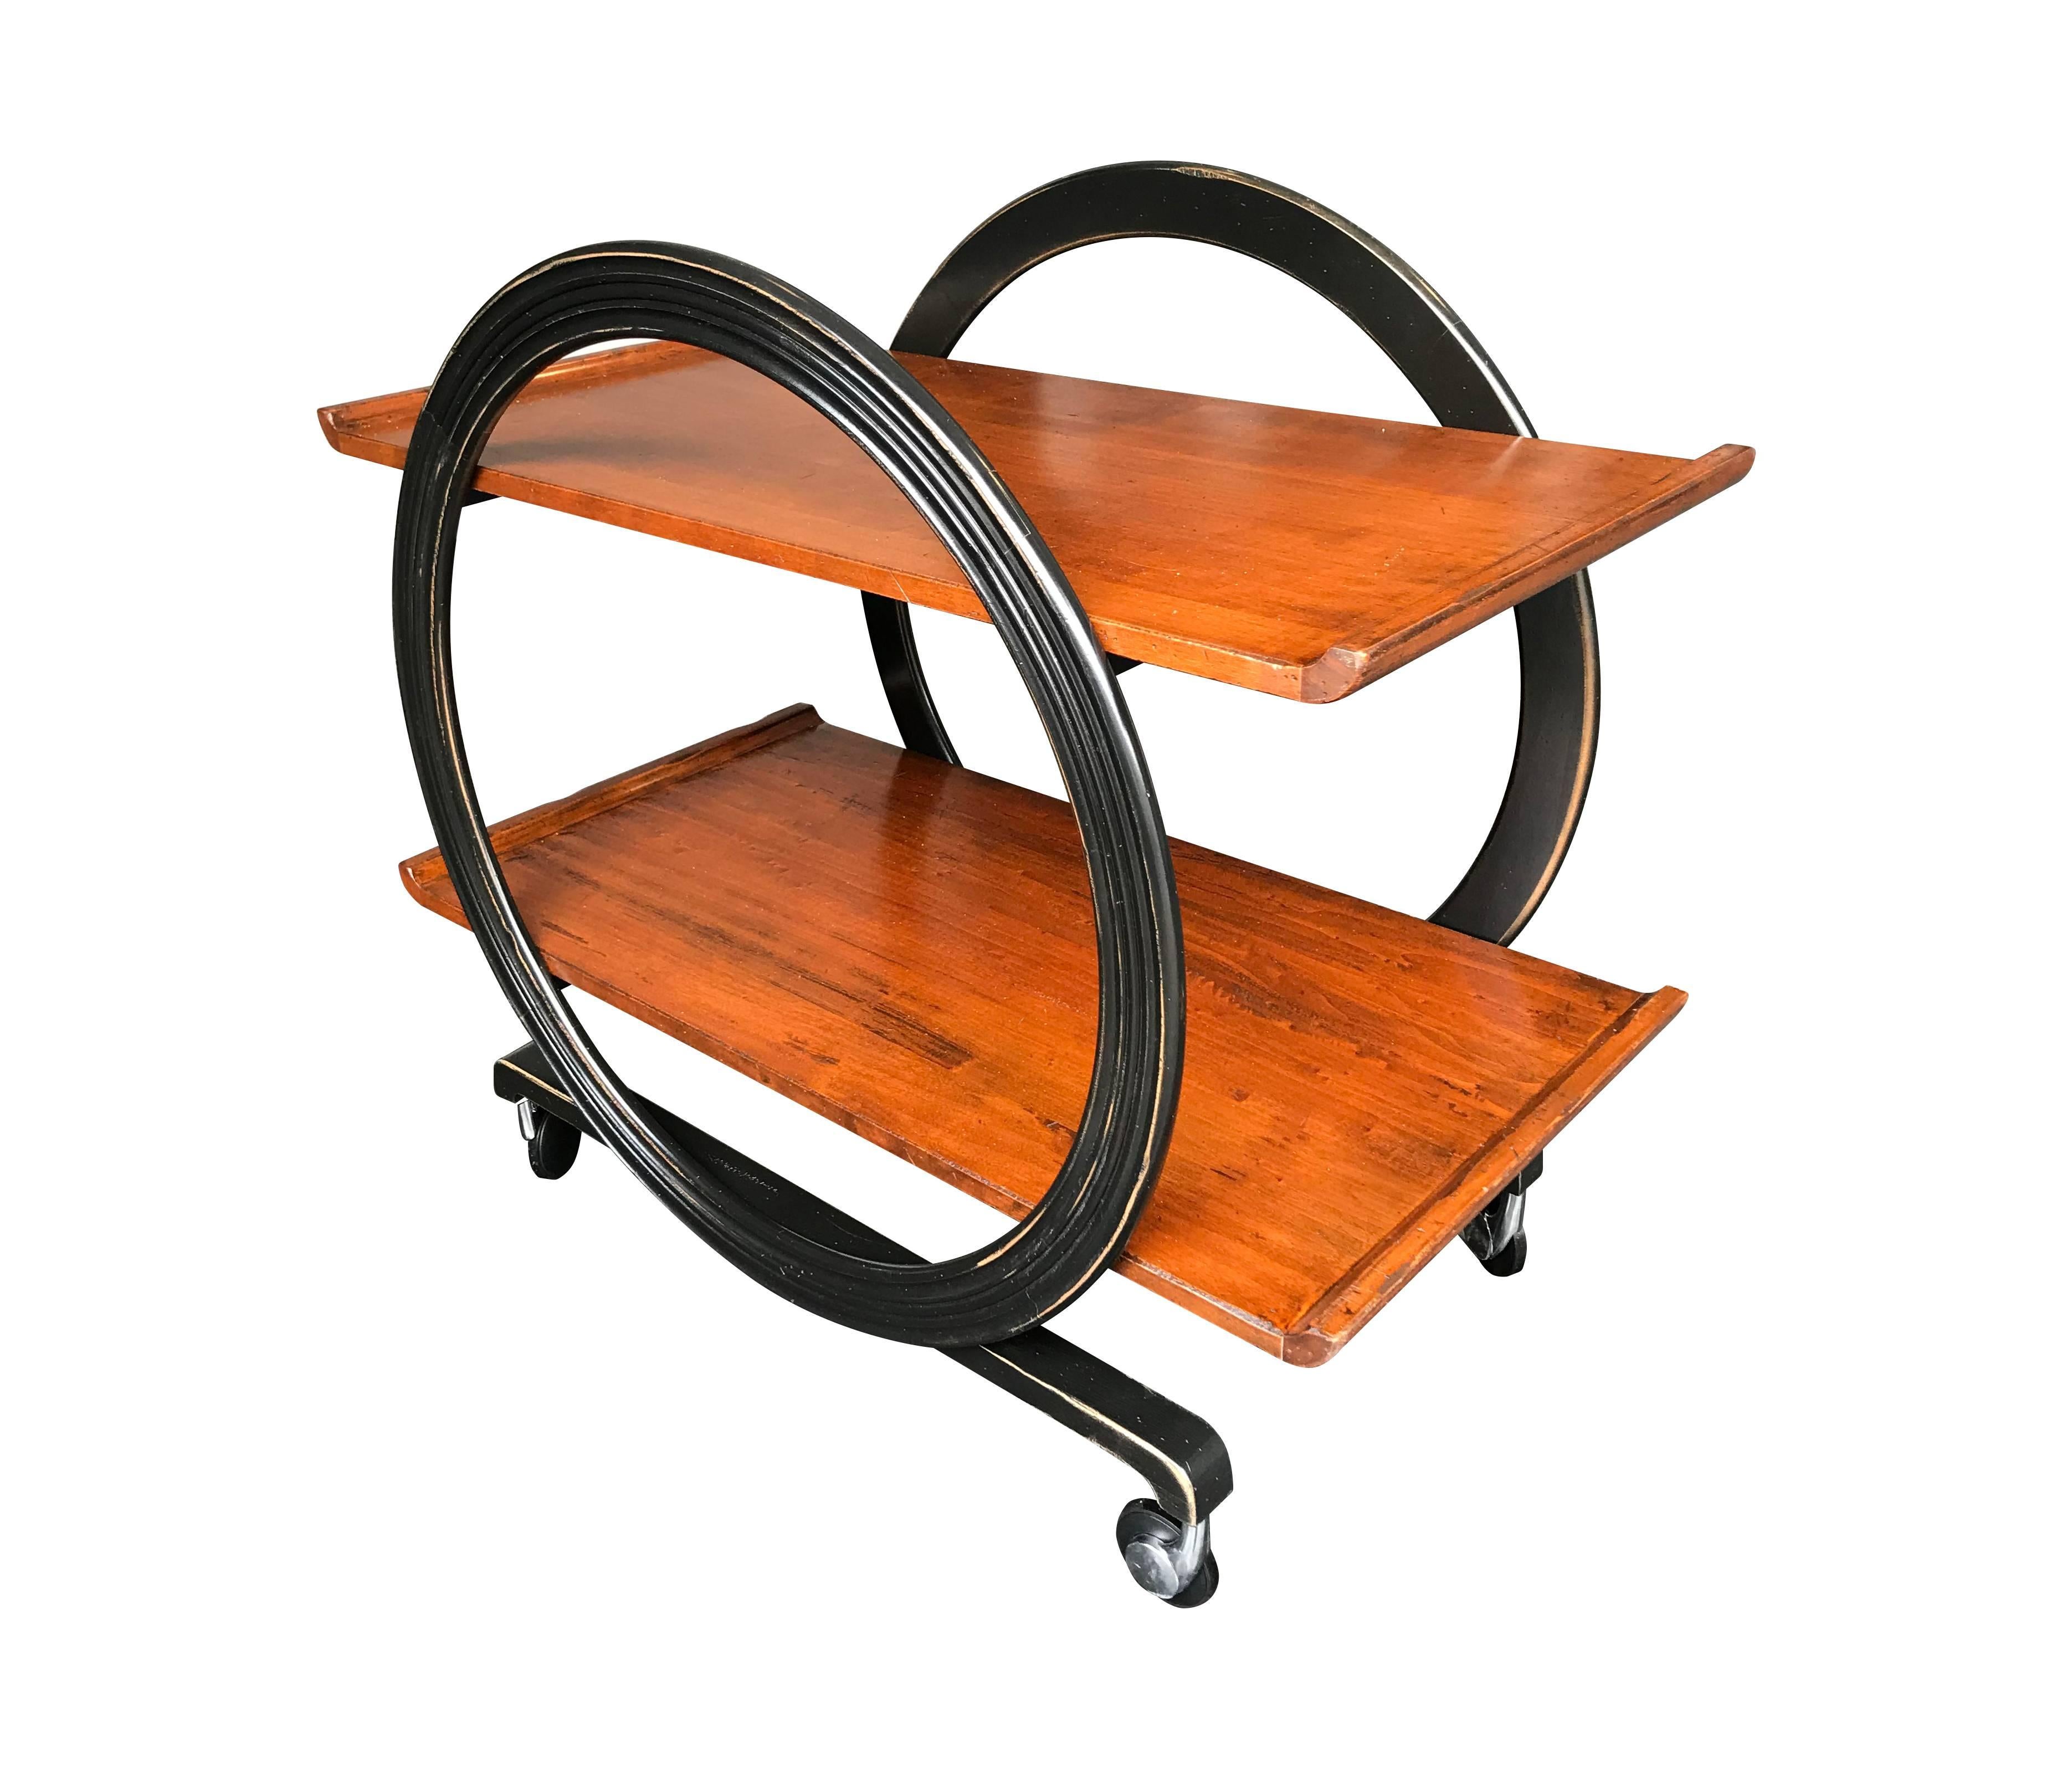 An Art Deco style bar trolley with varnished wooden shelves, with aged finish effect and ebonized circular design frame, on original castors.